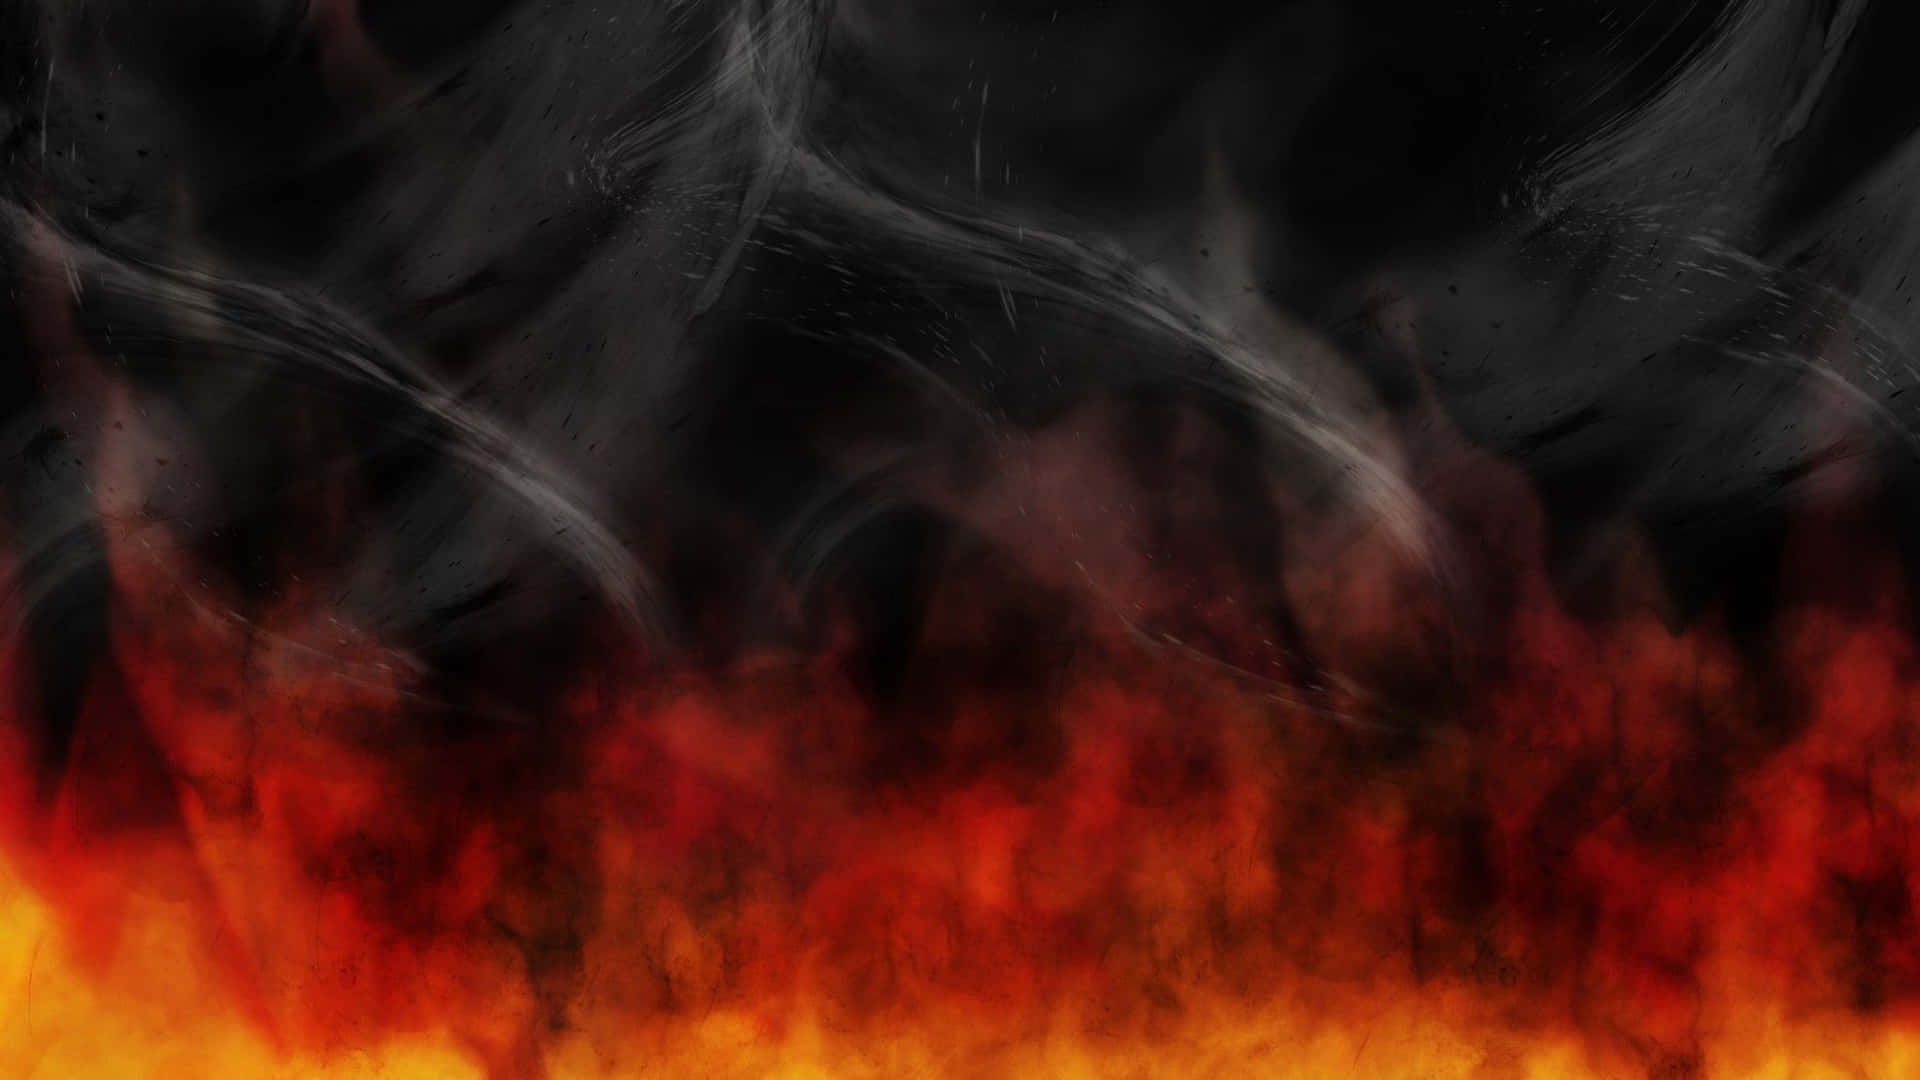 A Black And Red Fire Background With Flames